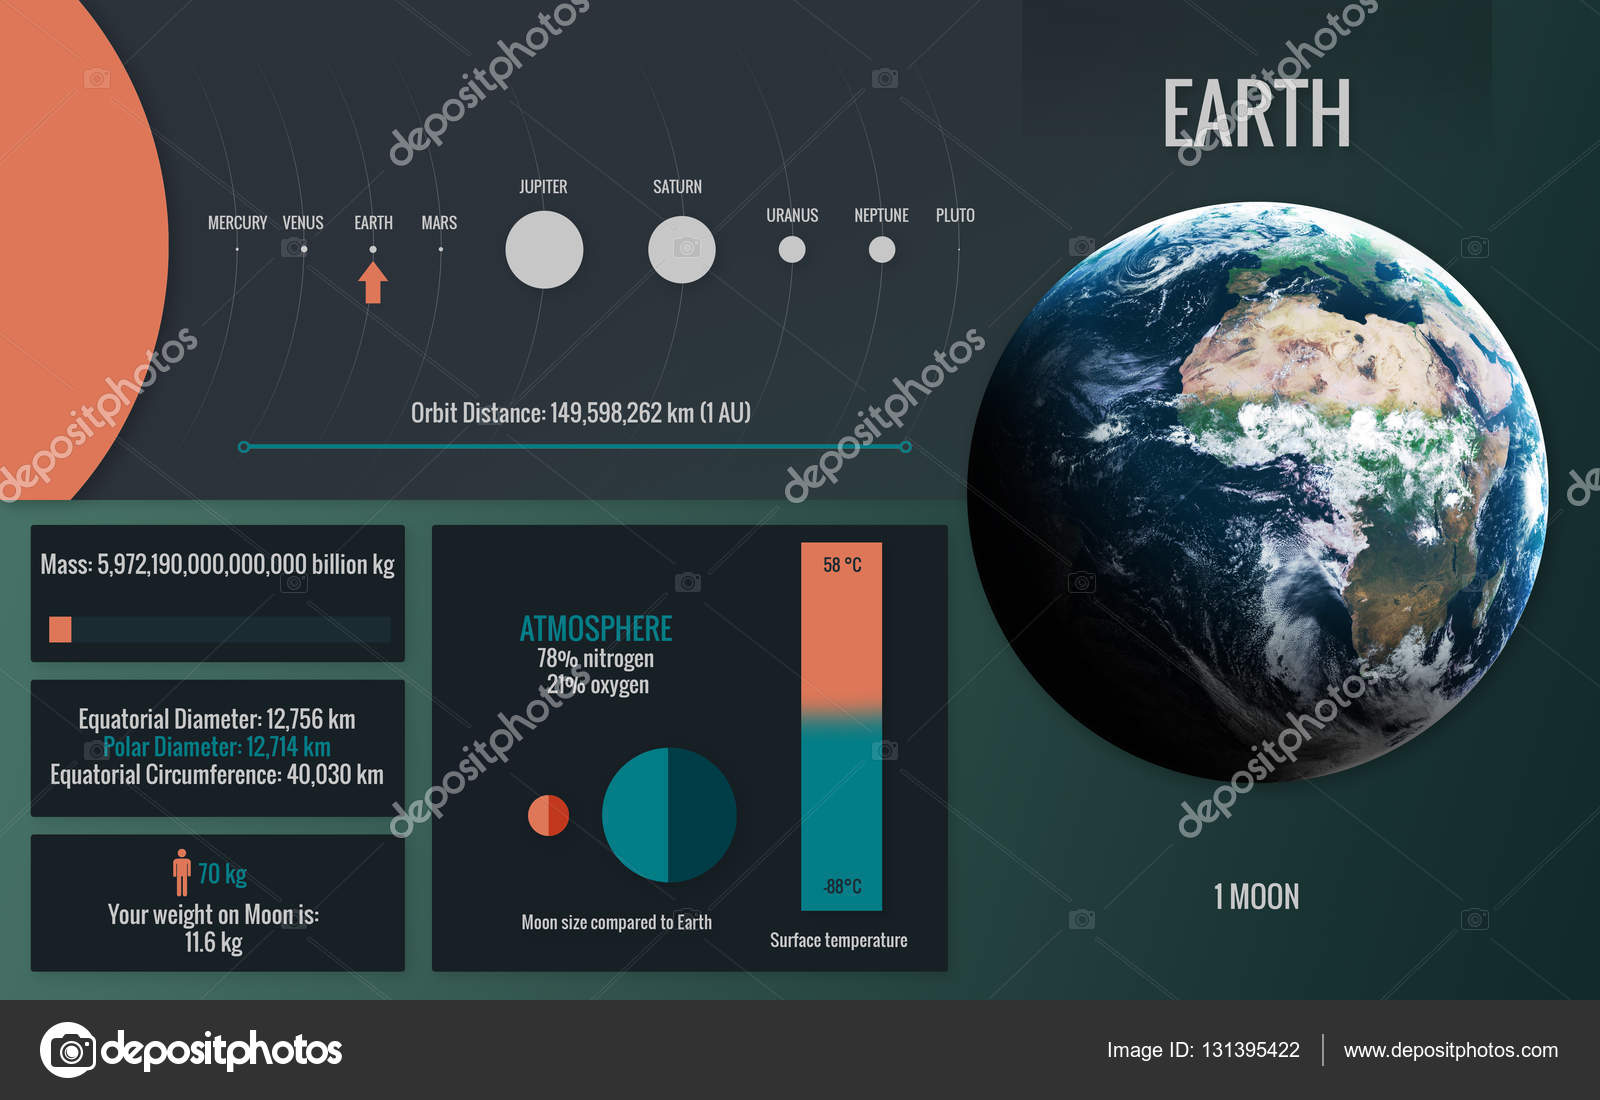 Earth Infographic Image Presents One Of The Solar System